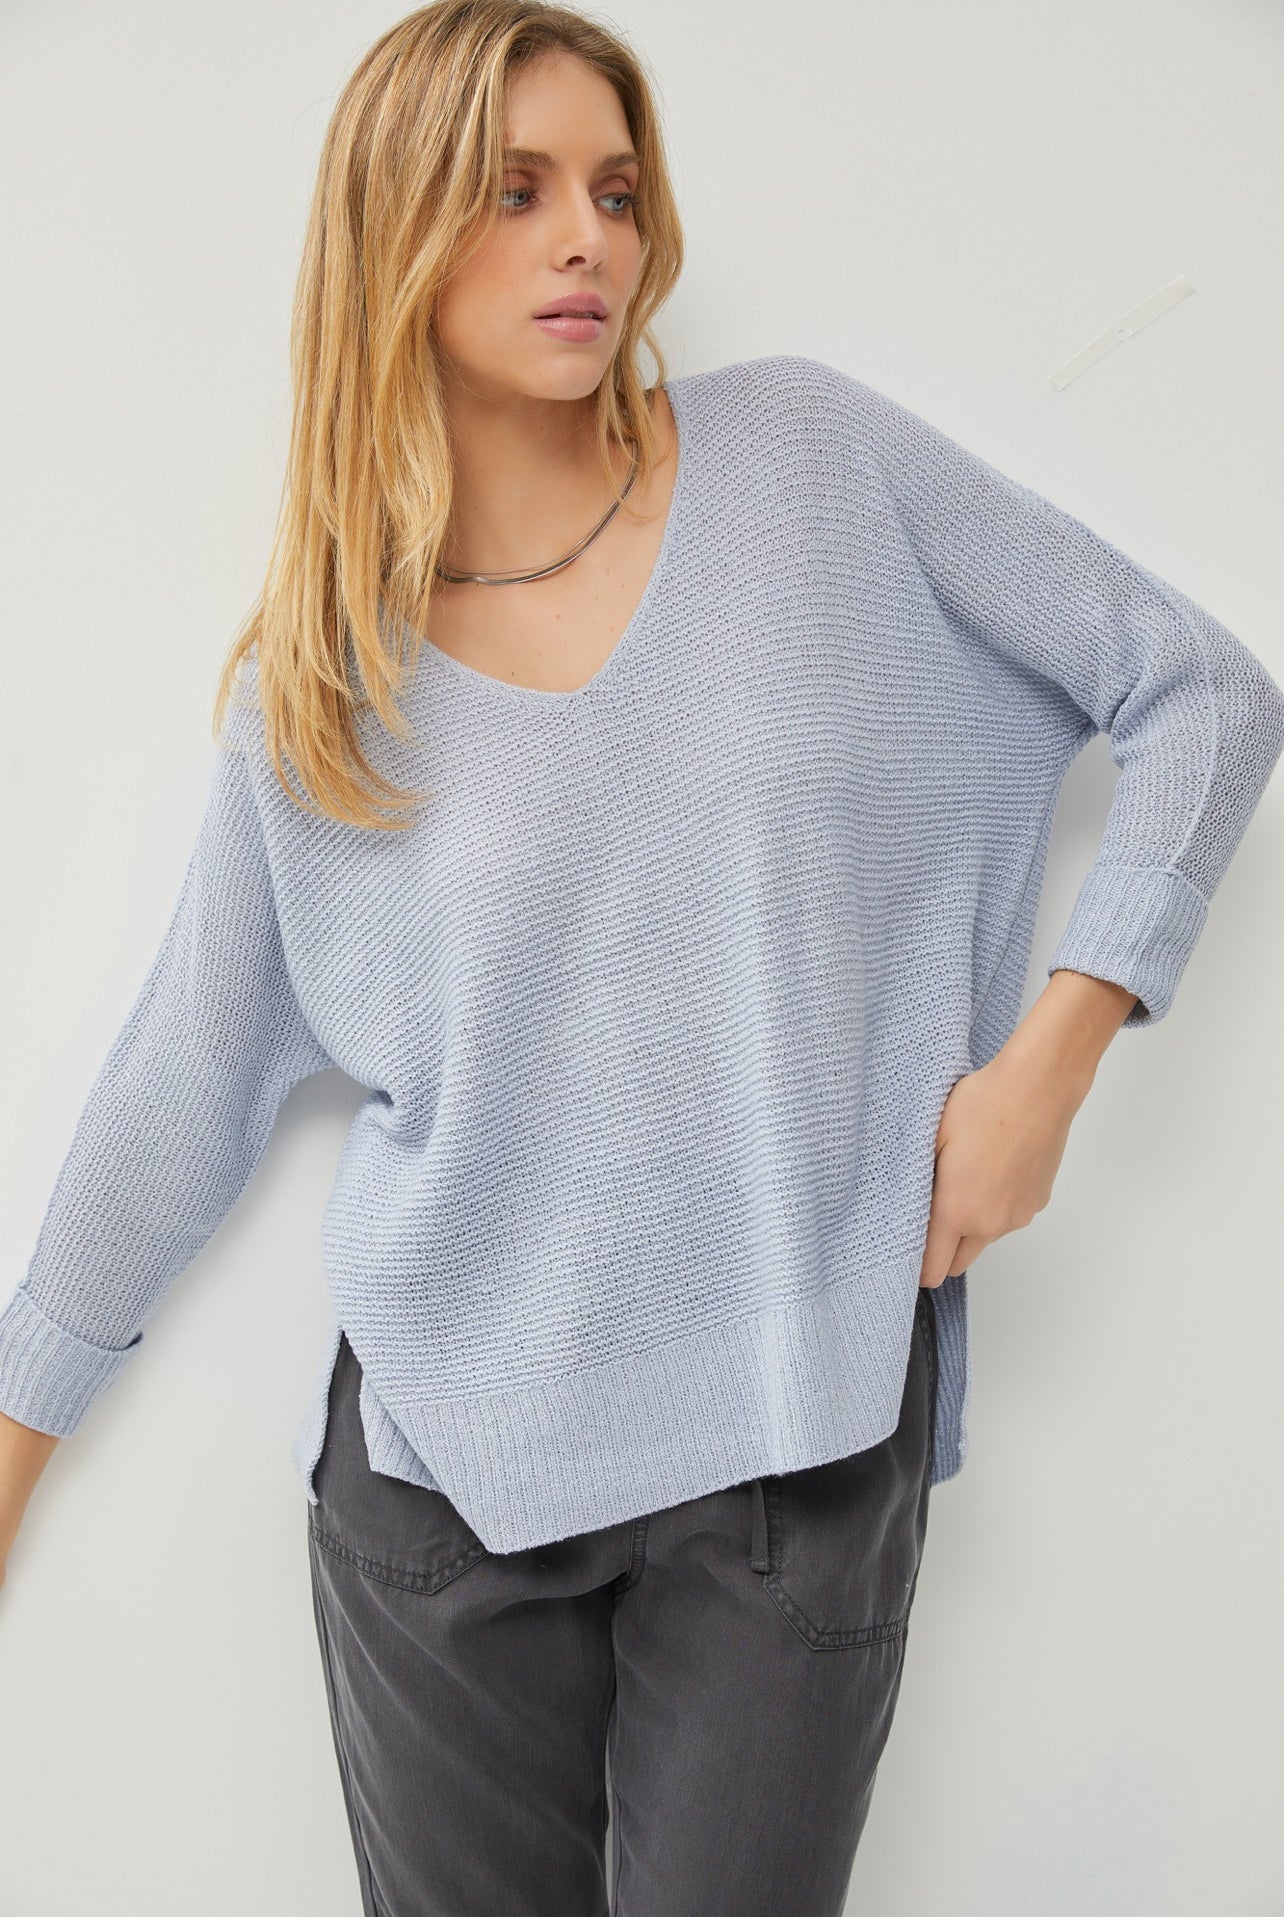 The Kelsey Sweater